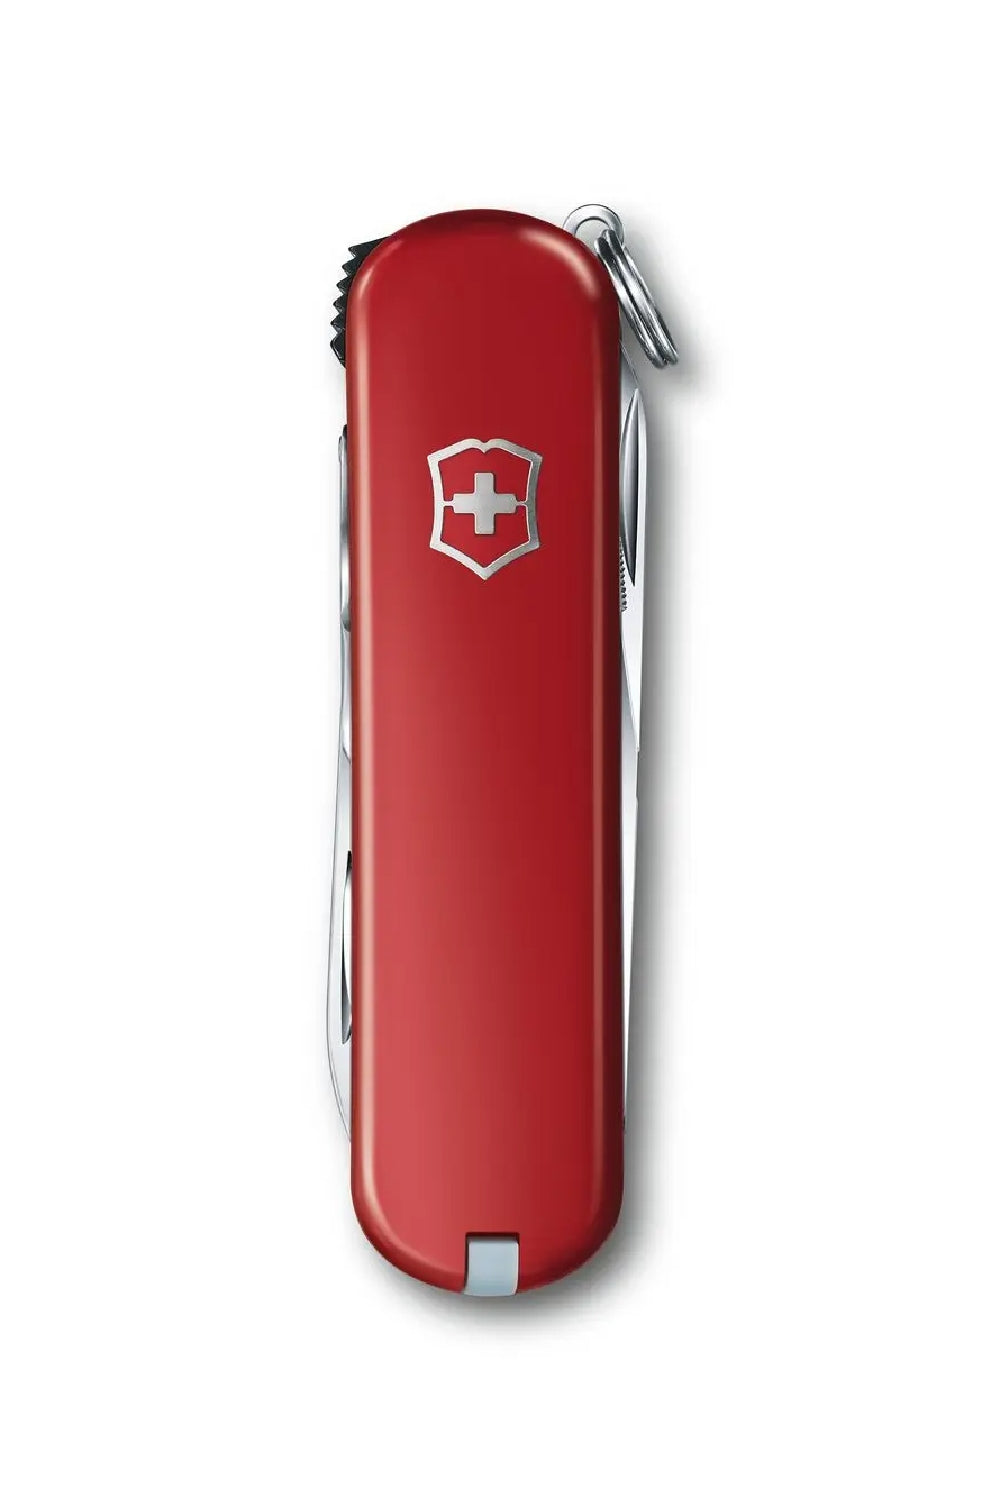 Victorinox Nail Clip 580 Swiss Army Small Pocket Knife in Red